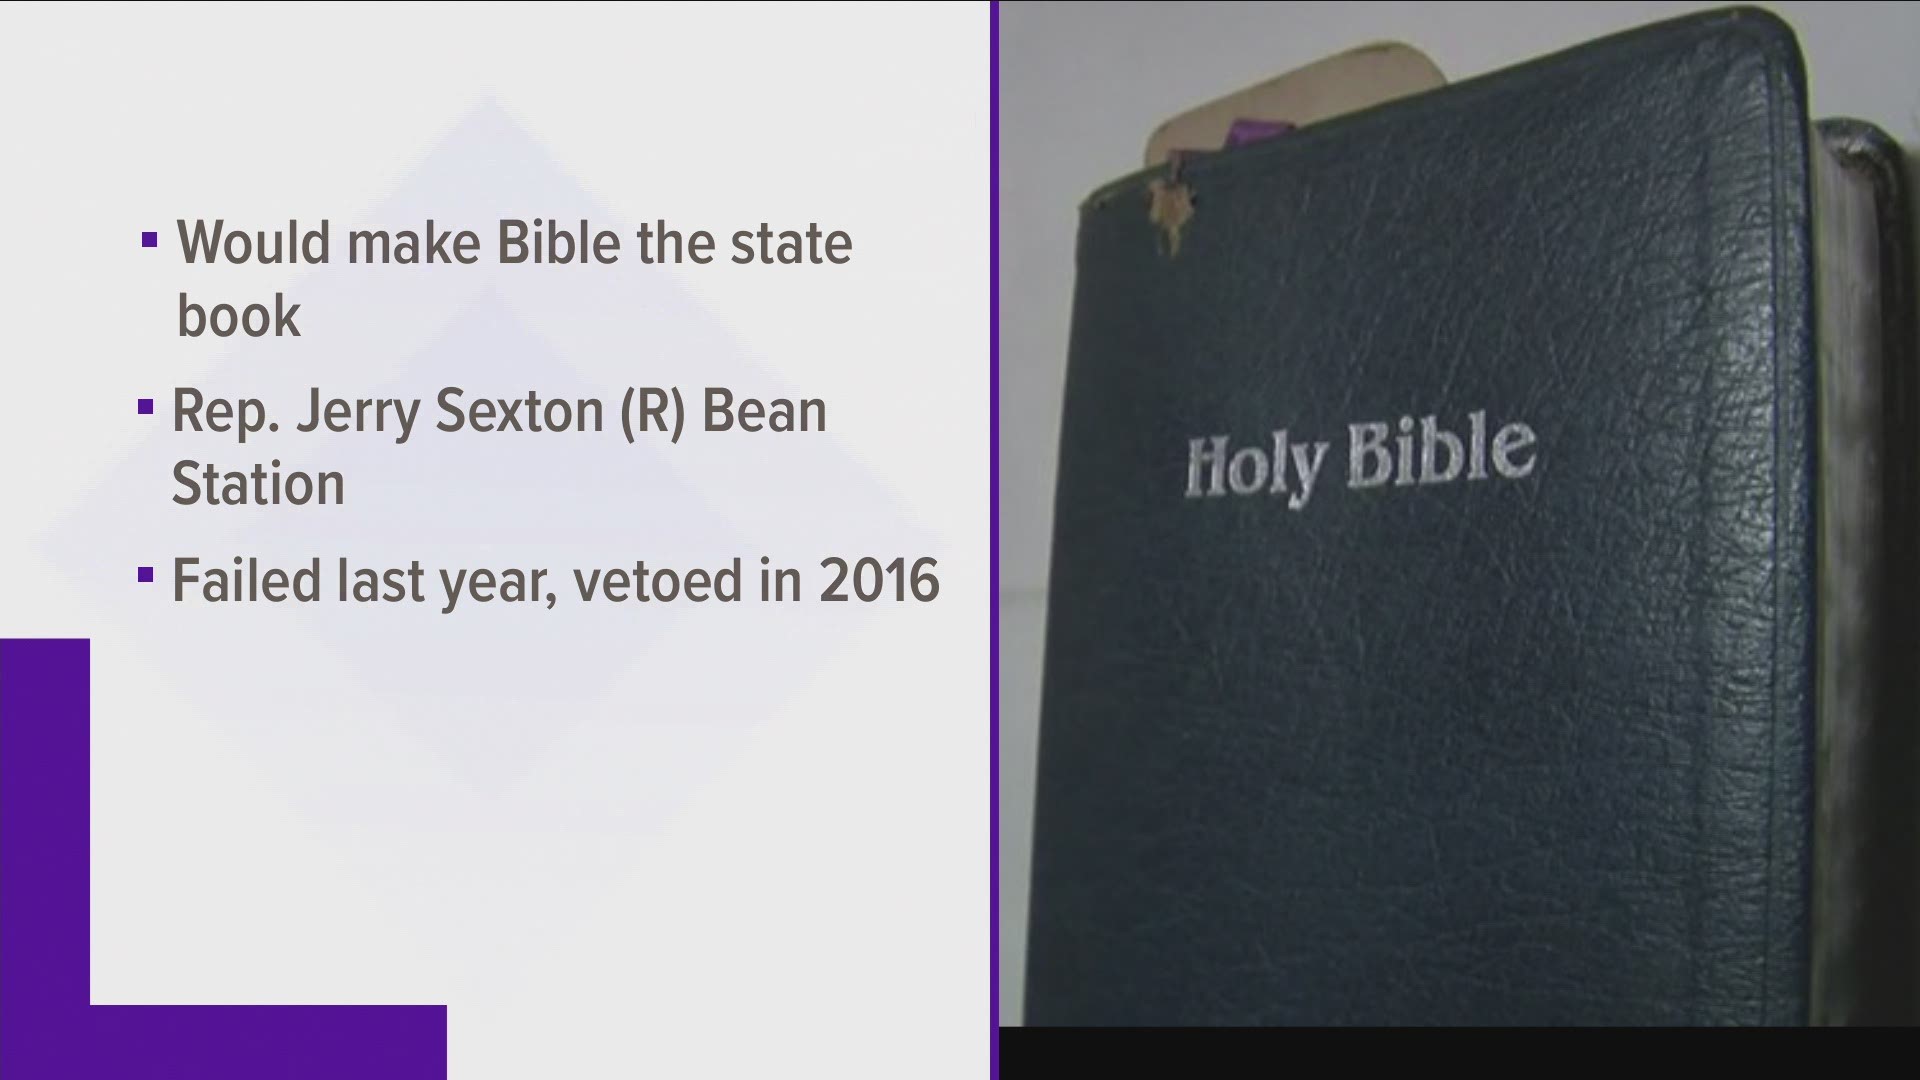 A bill that would make The Bible the state book is back. Representative Jerry Sexton from Bean Station re-filed the bill after it failed last year.